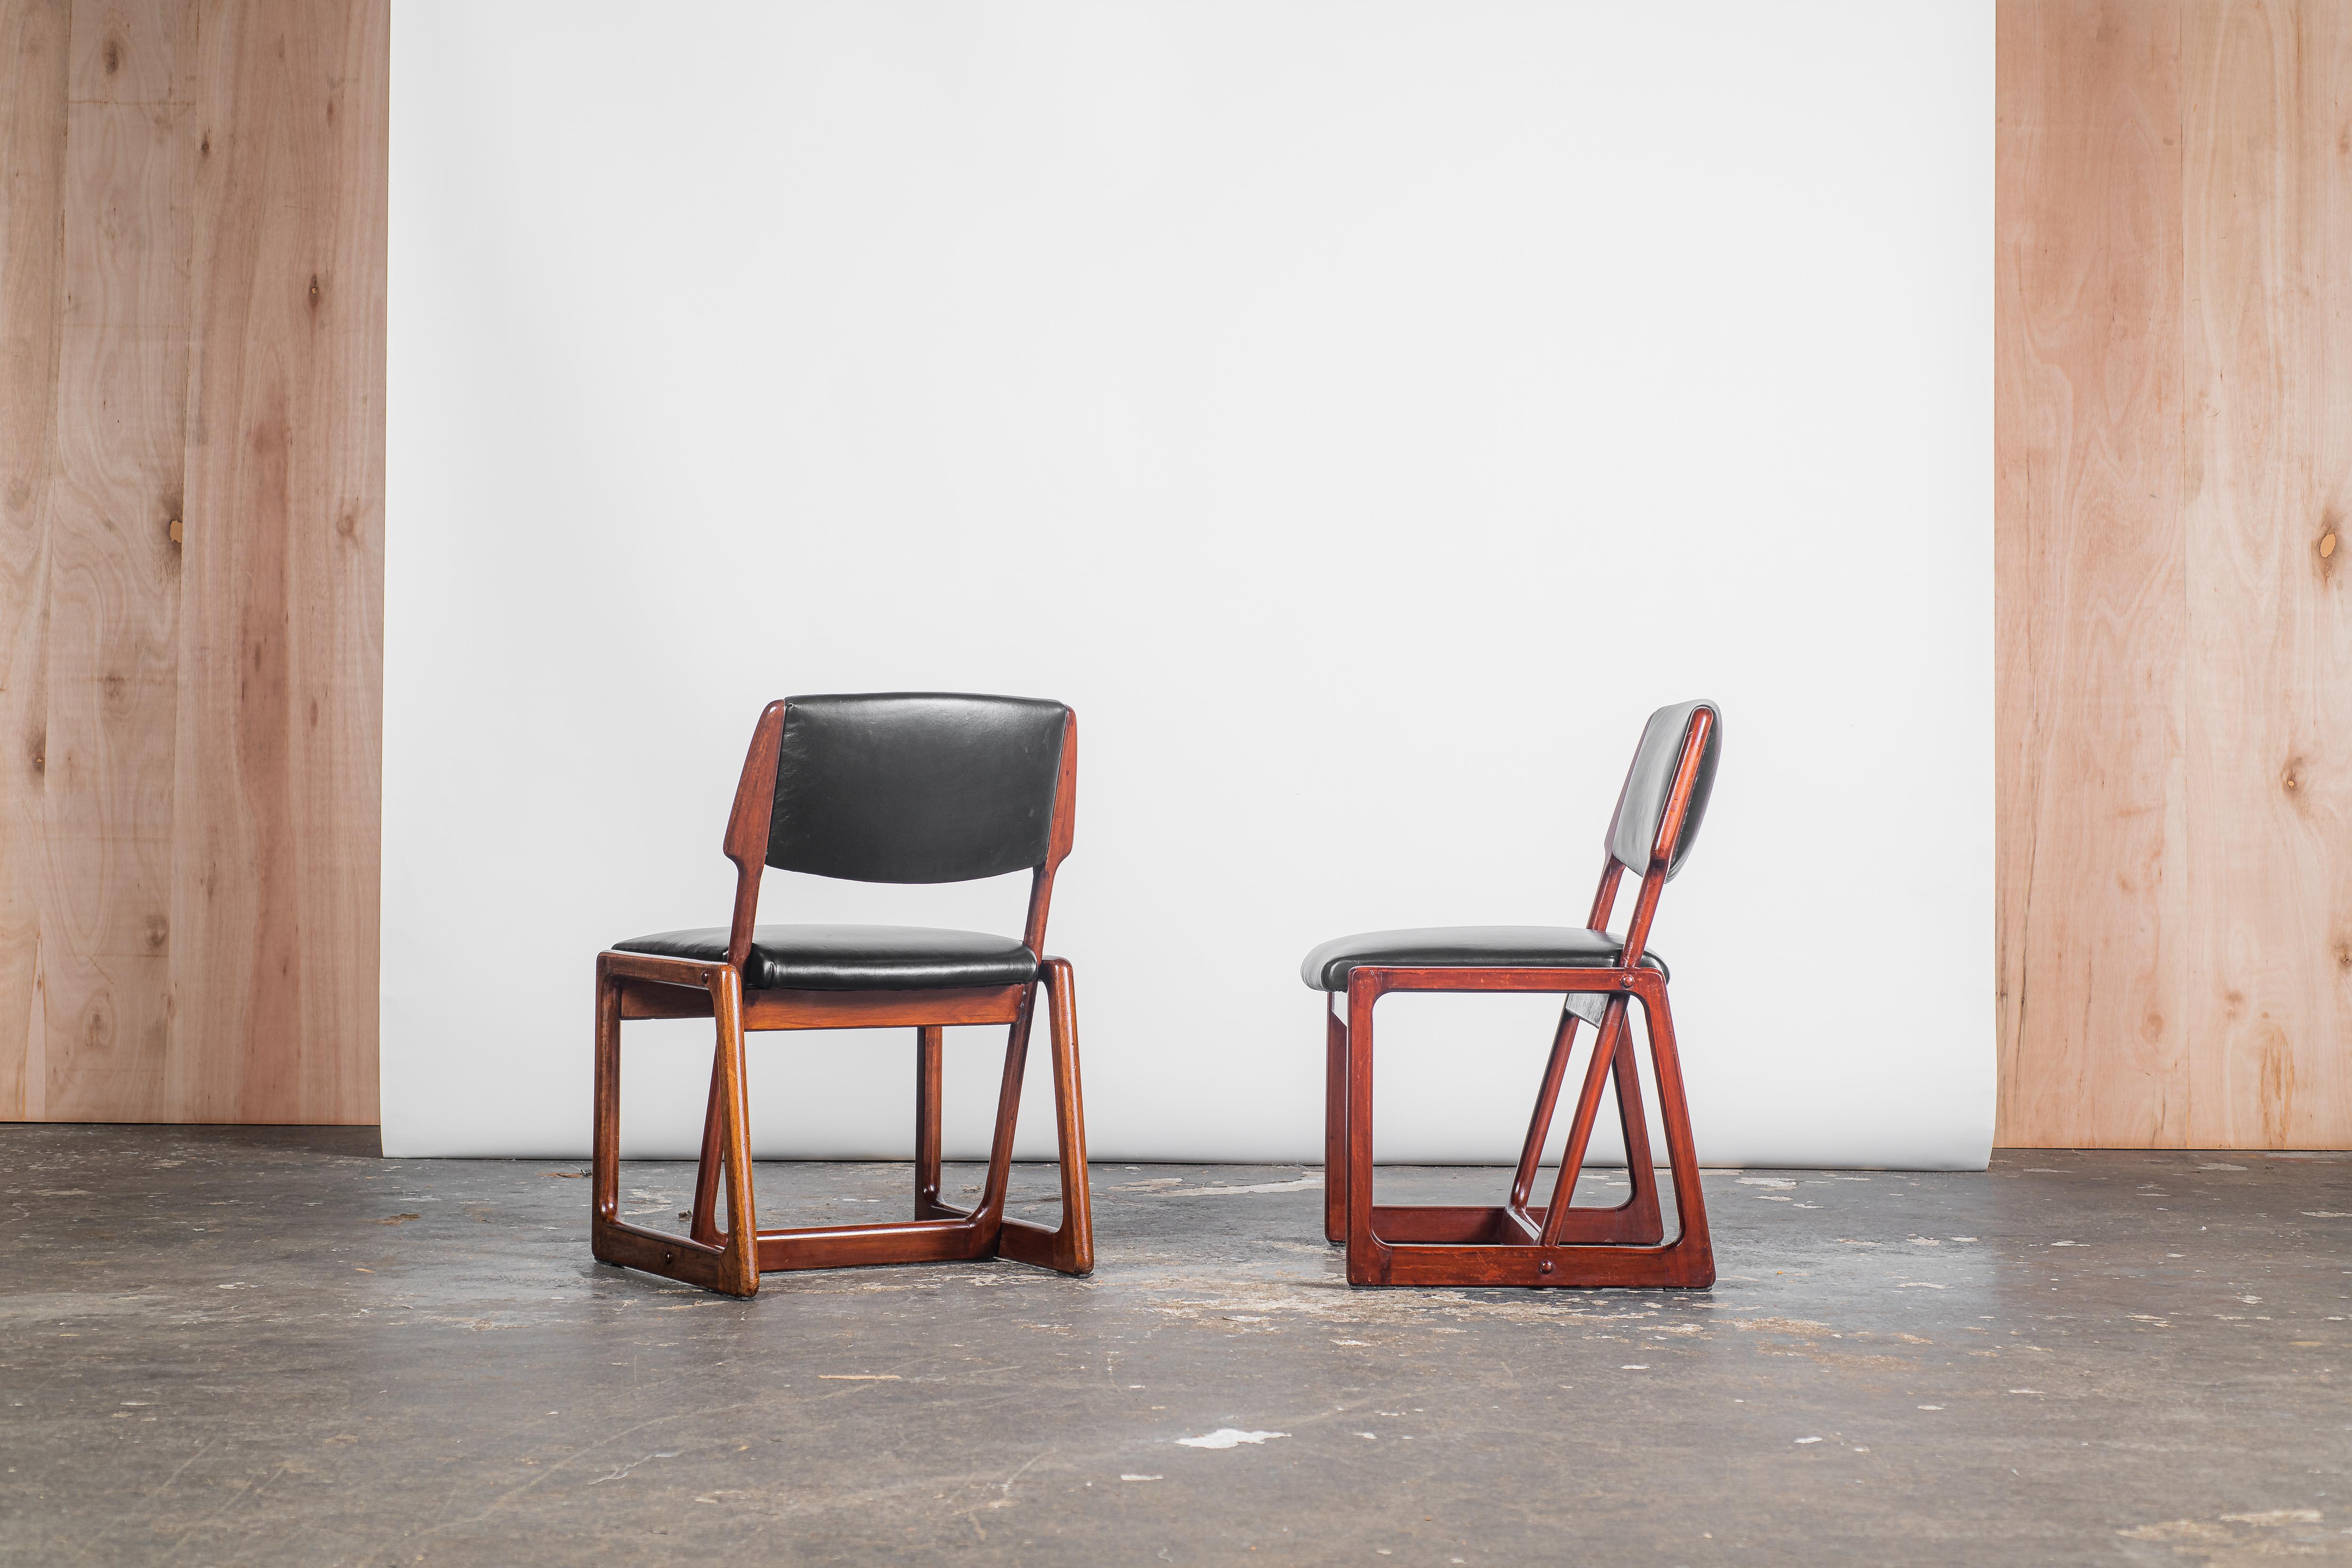 Allow me to introduce the mesmerizing Sergio Rodrigues -  Chico Chairs, a reduced and armless iteration of the renowned Cadeira Adolpho. Meticulously fashioned from solid wood, these chairs exude an air of sophistication, with their sleek seat and